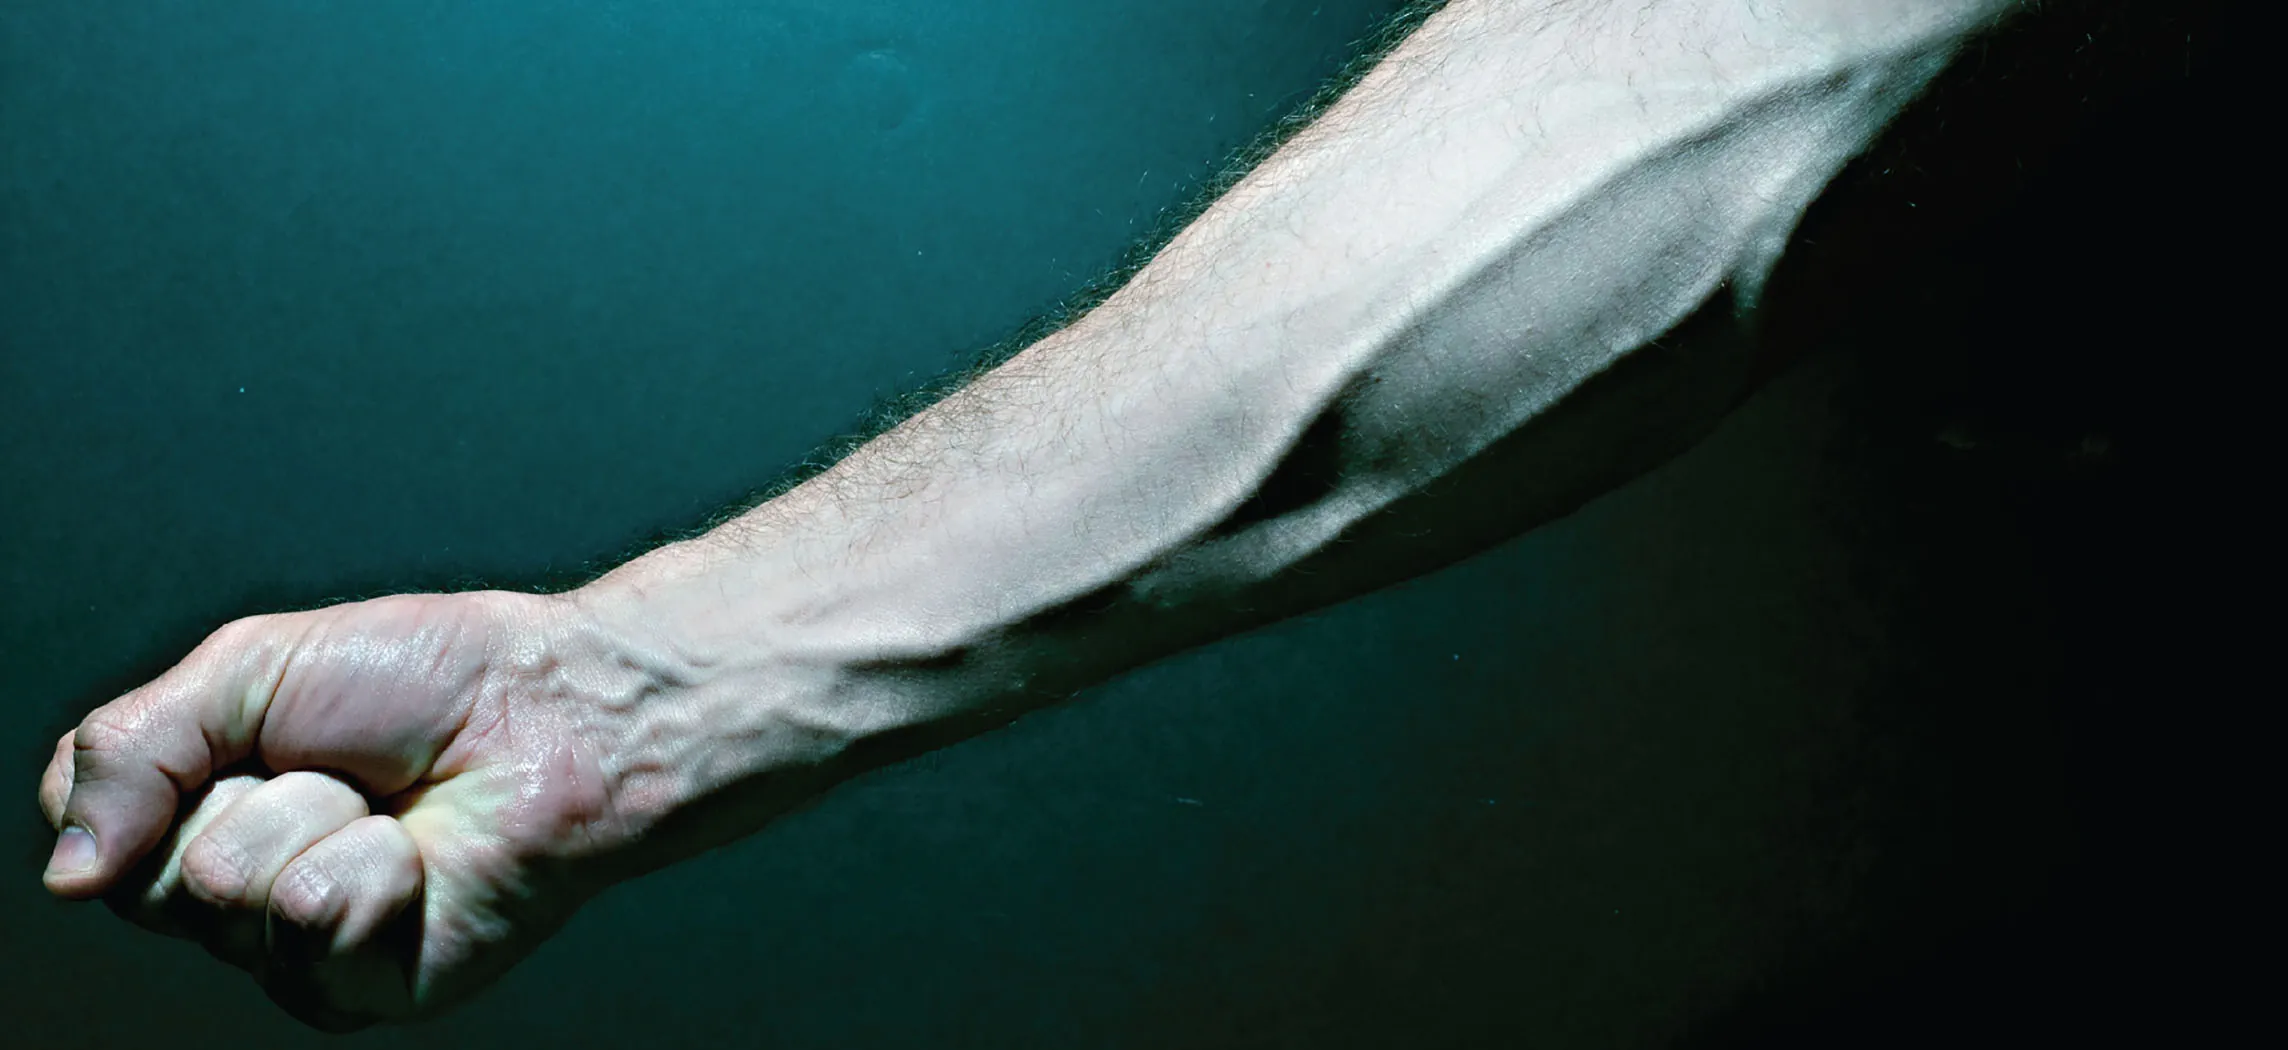 This photo shows a forearm with the veins bulging.